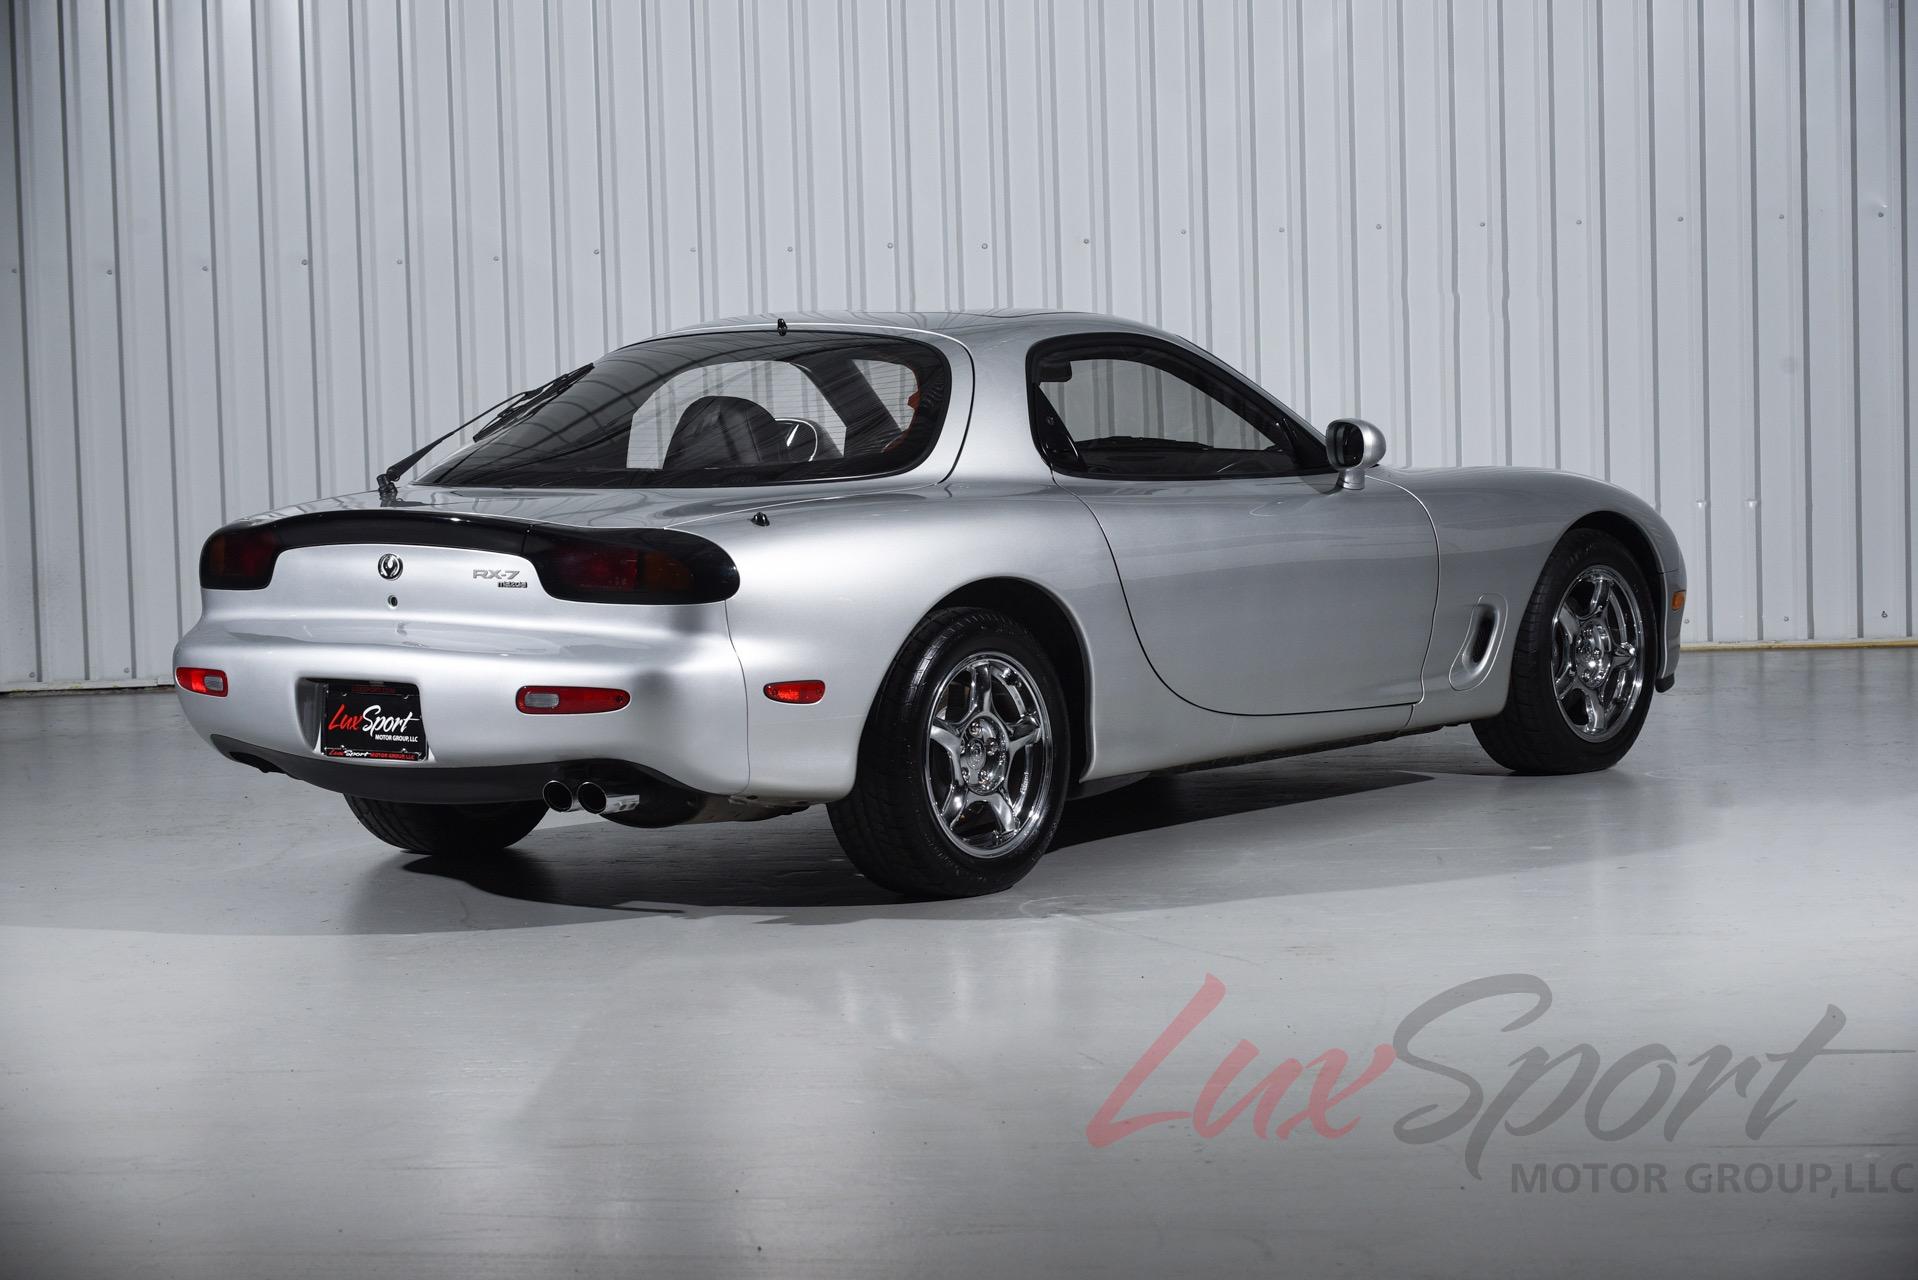 1993 Mazda Rx 7 Twin Turbo Coupe Stock 1993168 For Sale